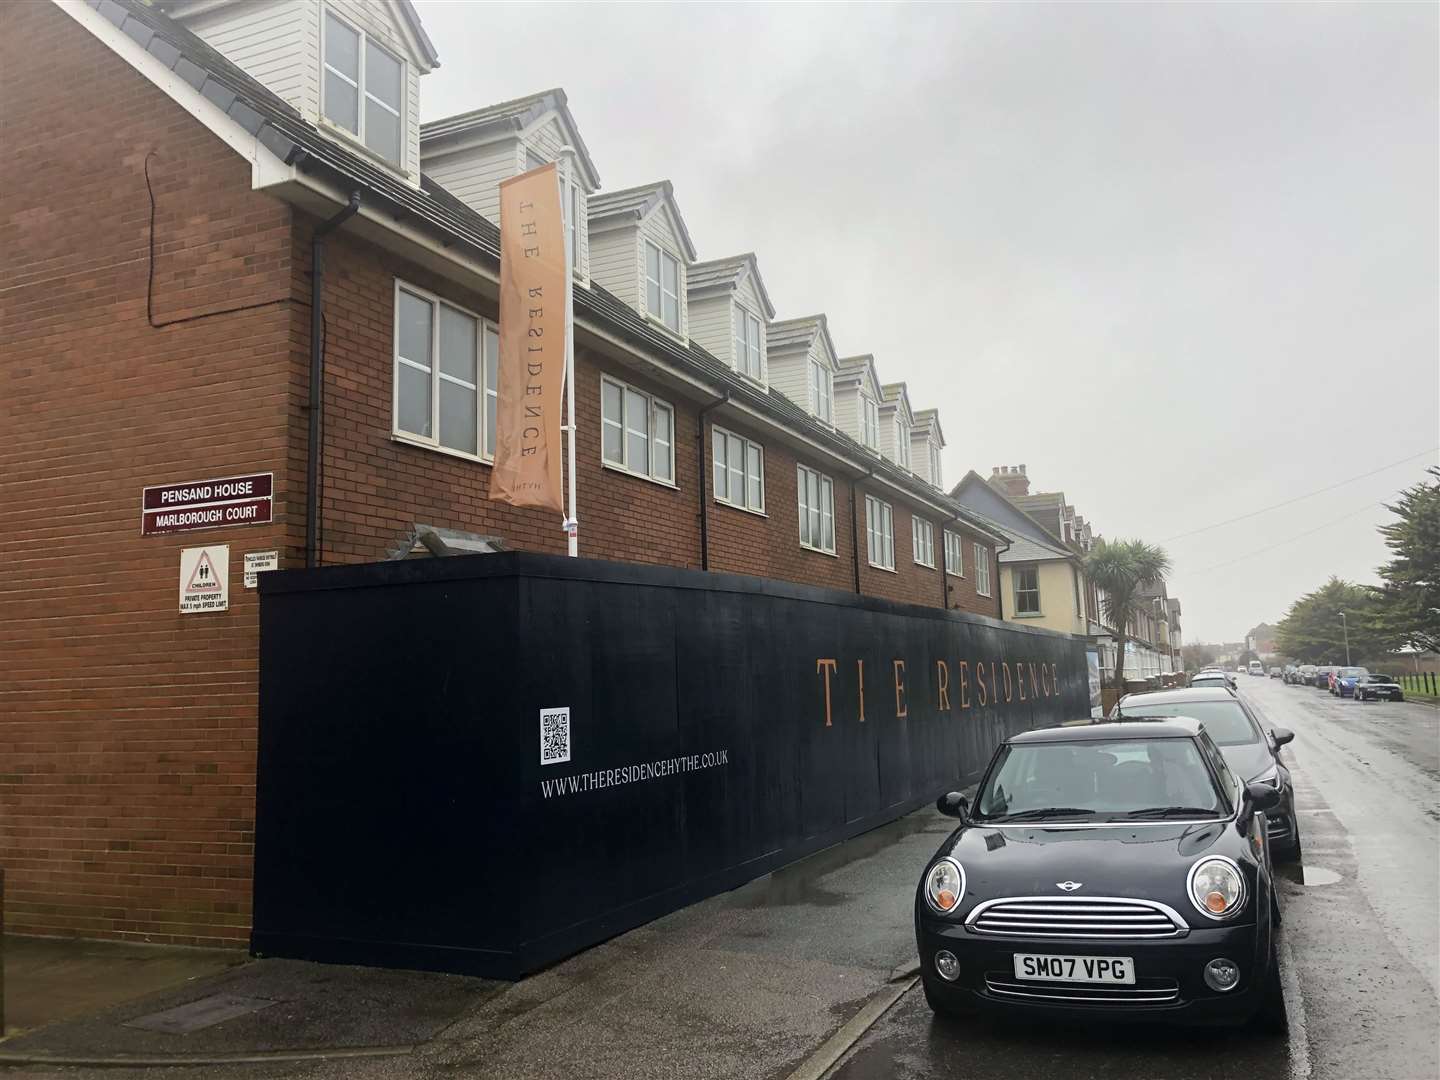 Hoardings advertising The Residence surrounding Marlborough Court, in South Road, Hythe, which is being turned into 20 new apartments under the first phase of the plans